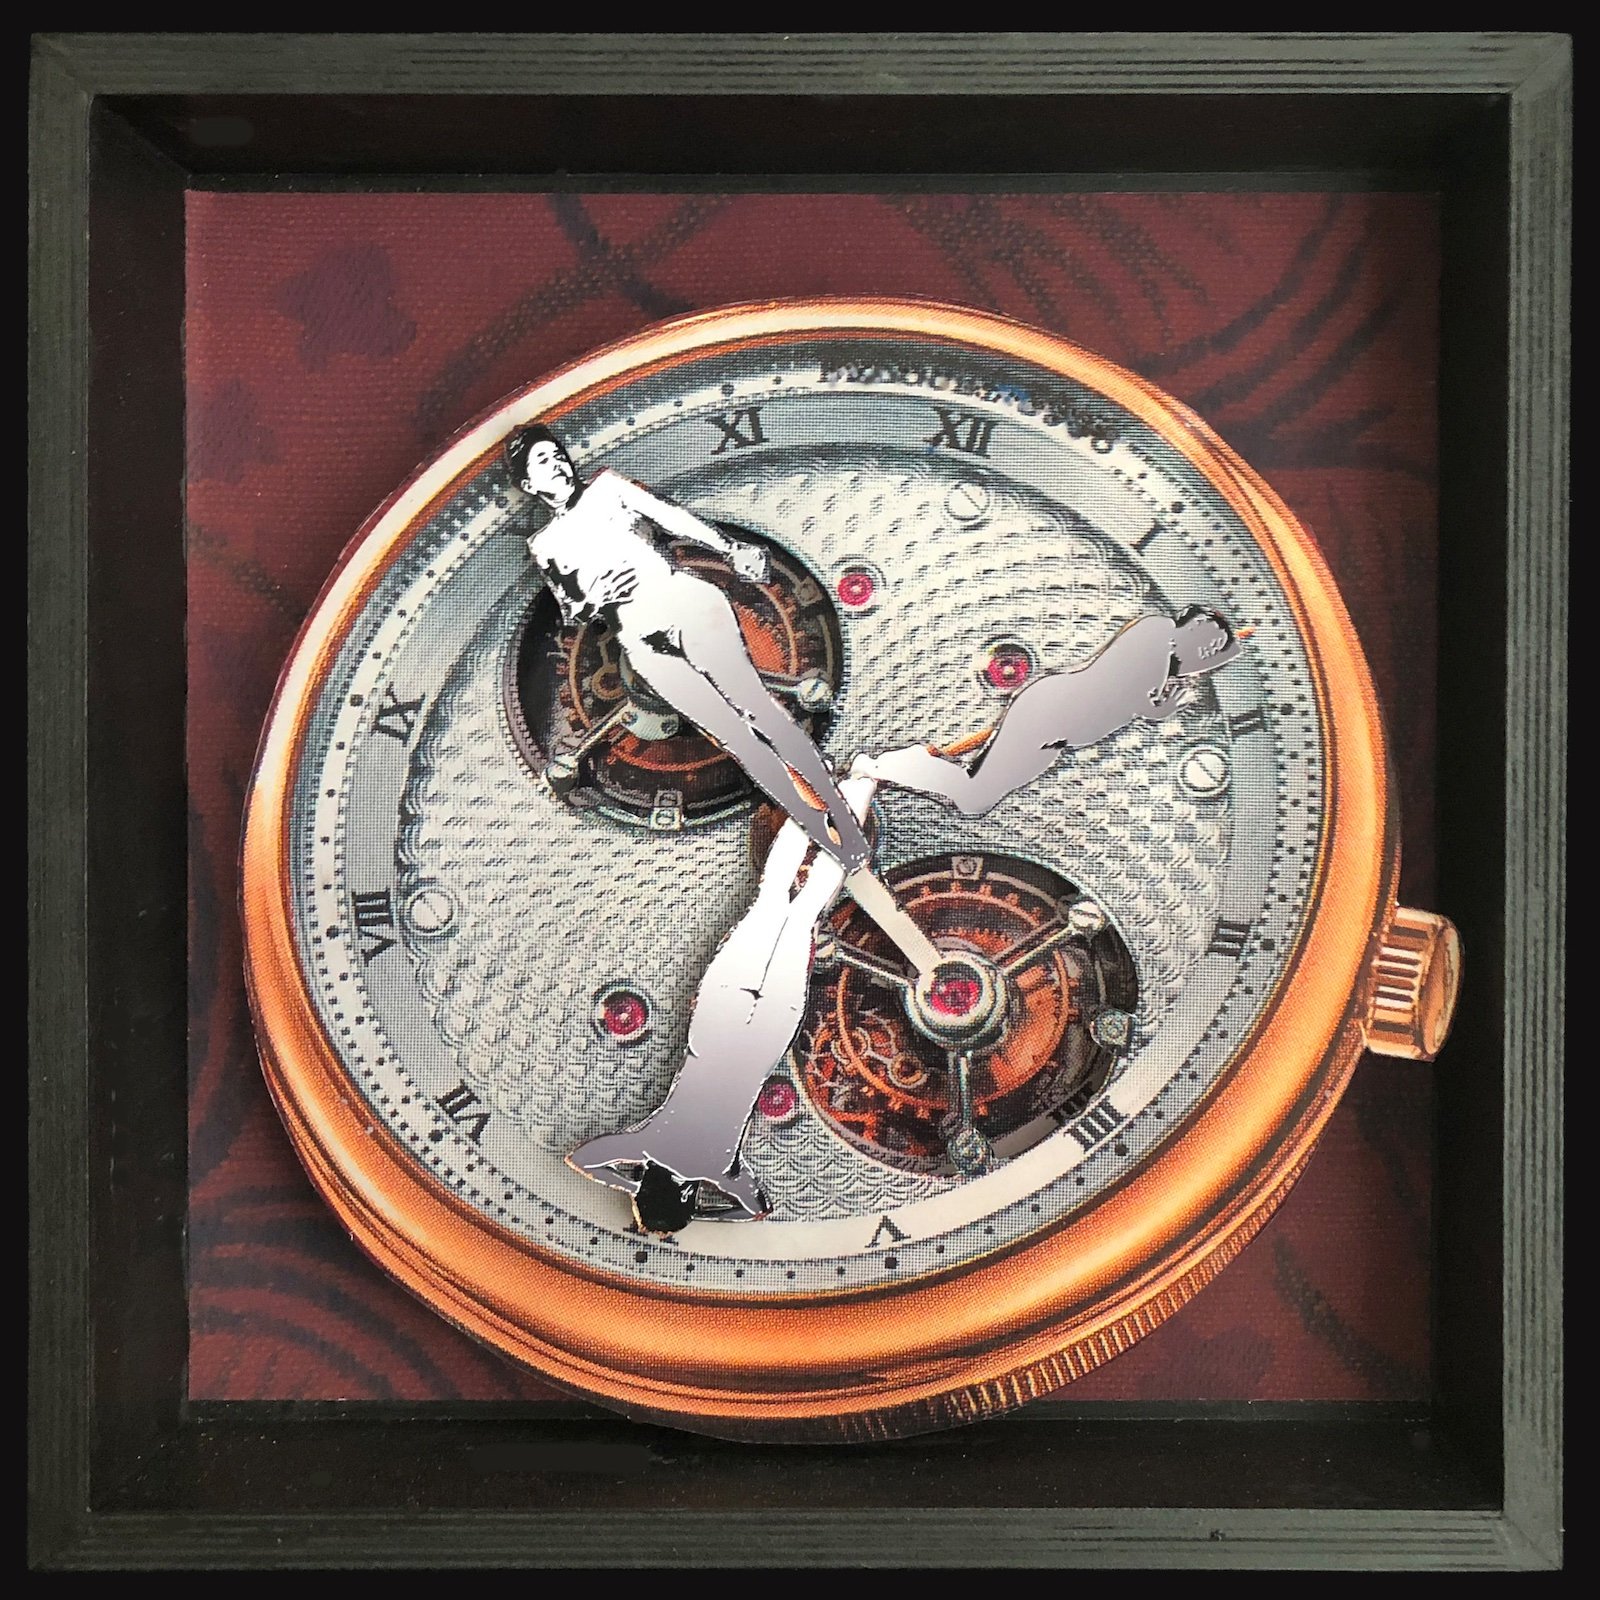 St. Catherine's Wheel (Time Management). Collage/Assemblage, 12" x 12" x 3" (2023)